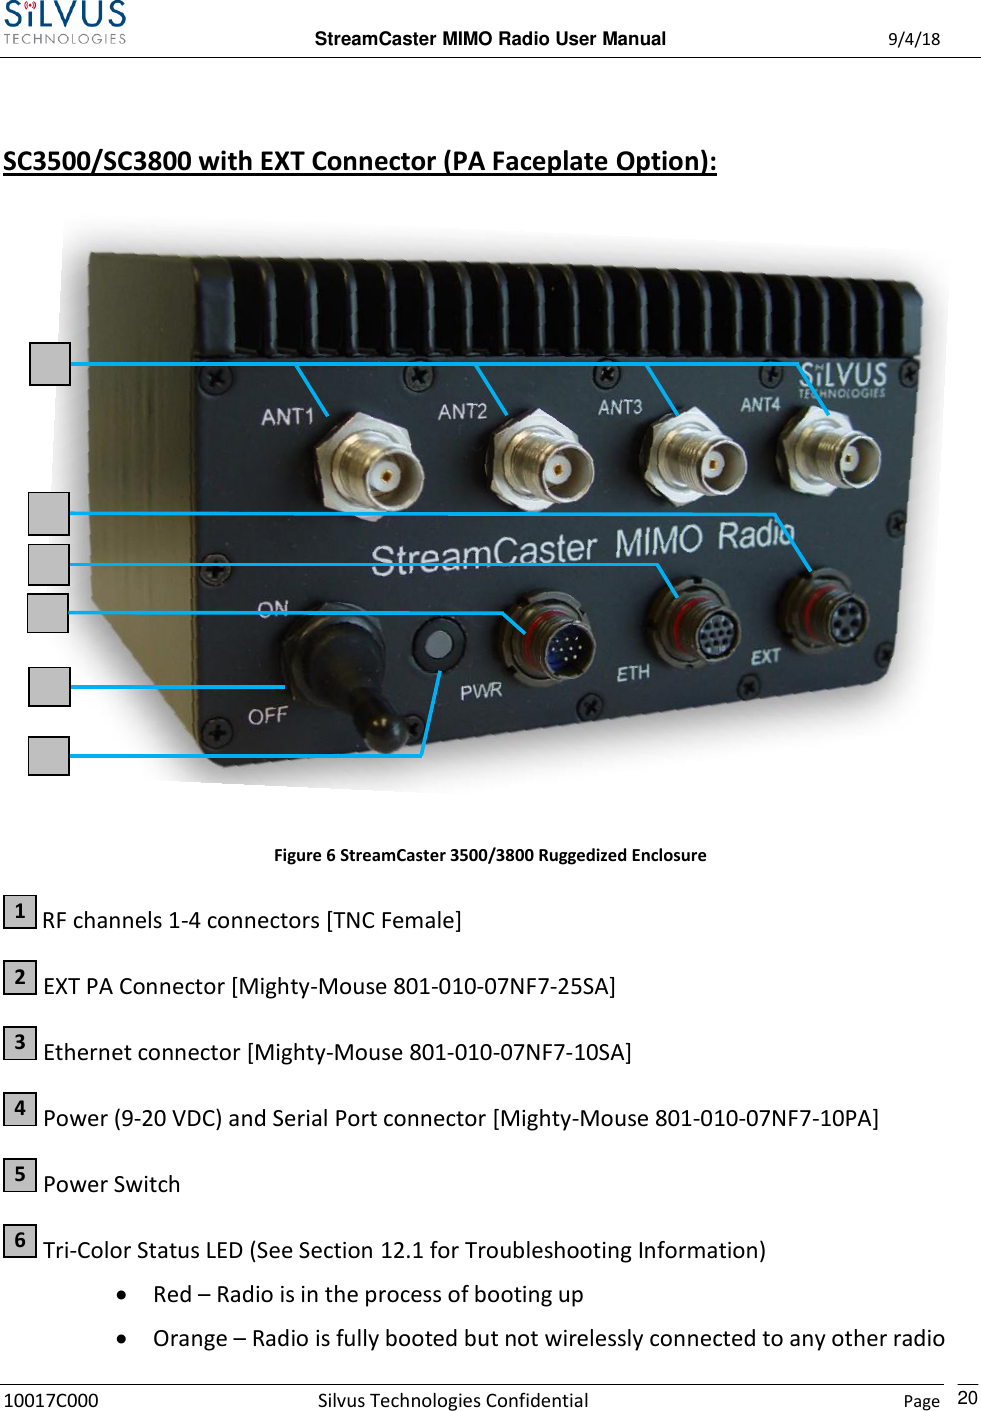  StreamCaster MIMO Radio User Manual  9/4/18 10017C000 Silvus Technologies Confidential    Page    20  SC3500/SC3800 with EXT Connector (PA Faceplate Option):    Figure 6 StreamCaster 3500/3800 Ruggedized Enclosure  RF channels 1-4 connectors [TNC Female]  EXT PA Connector [Mighty-Mouse 801-010-07NF7-25SA]  Ethernet connector [Mighty-Mouse 801-010-07NF7-10SA]  Power (9-20 VDC) and Serial Port connector [Mighty-Mouse 801-010-07NF7-10PA]  Power Switch  Tri-Color Status LED (See Section 12.1 for Troubleshooting Information)  Red – Radio is in the process of booting up  Orange – Radio is fully booted but not wirelessly connected to any other radio 6 5 4 3 2 1 